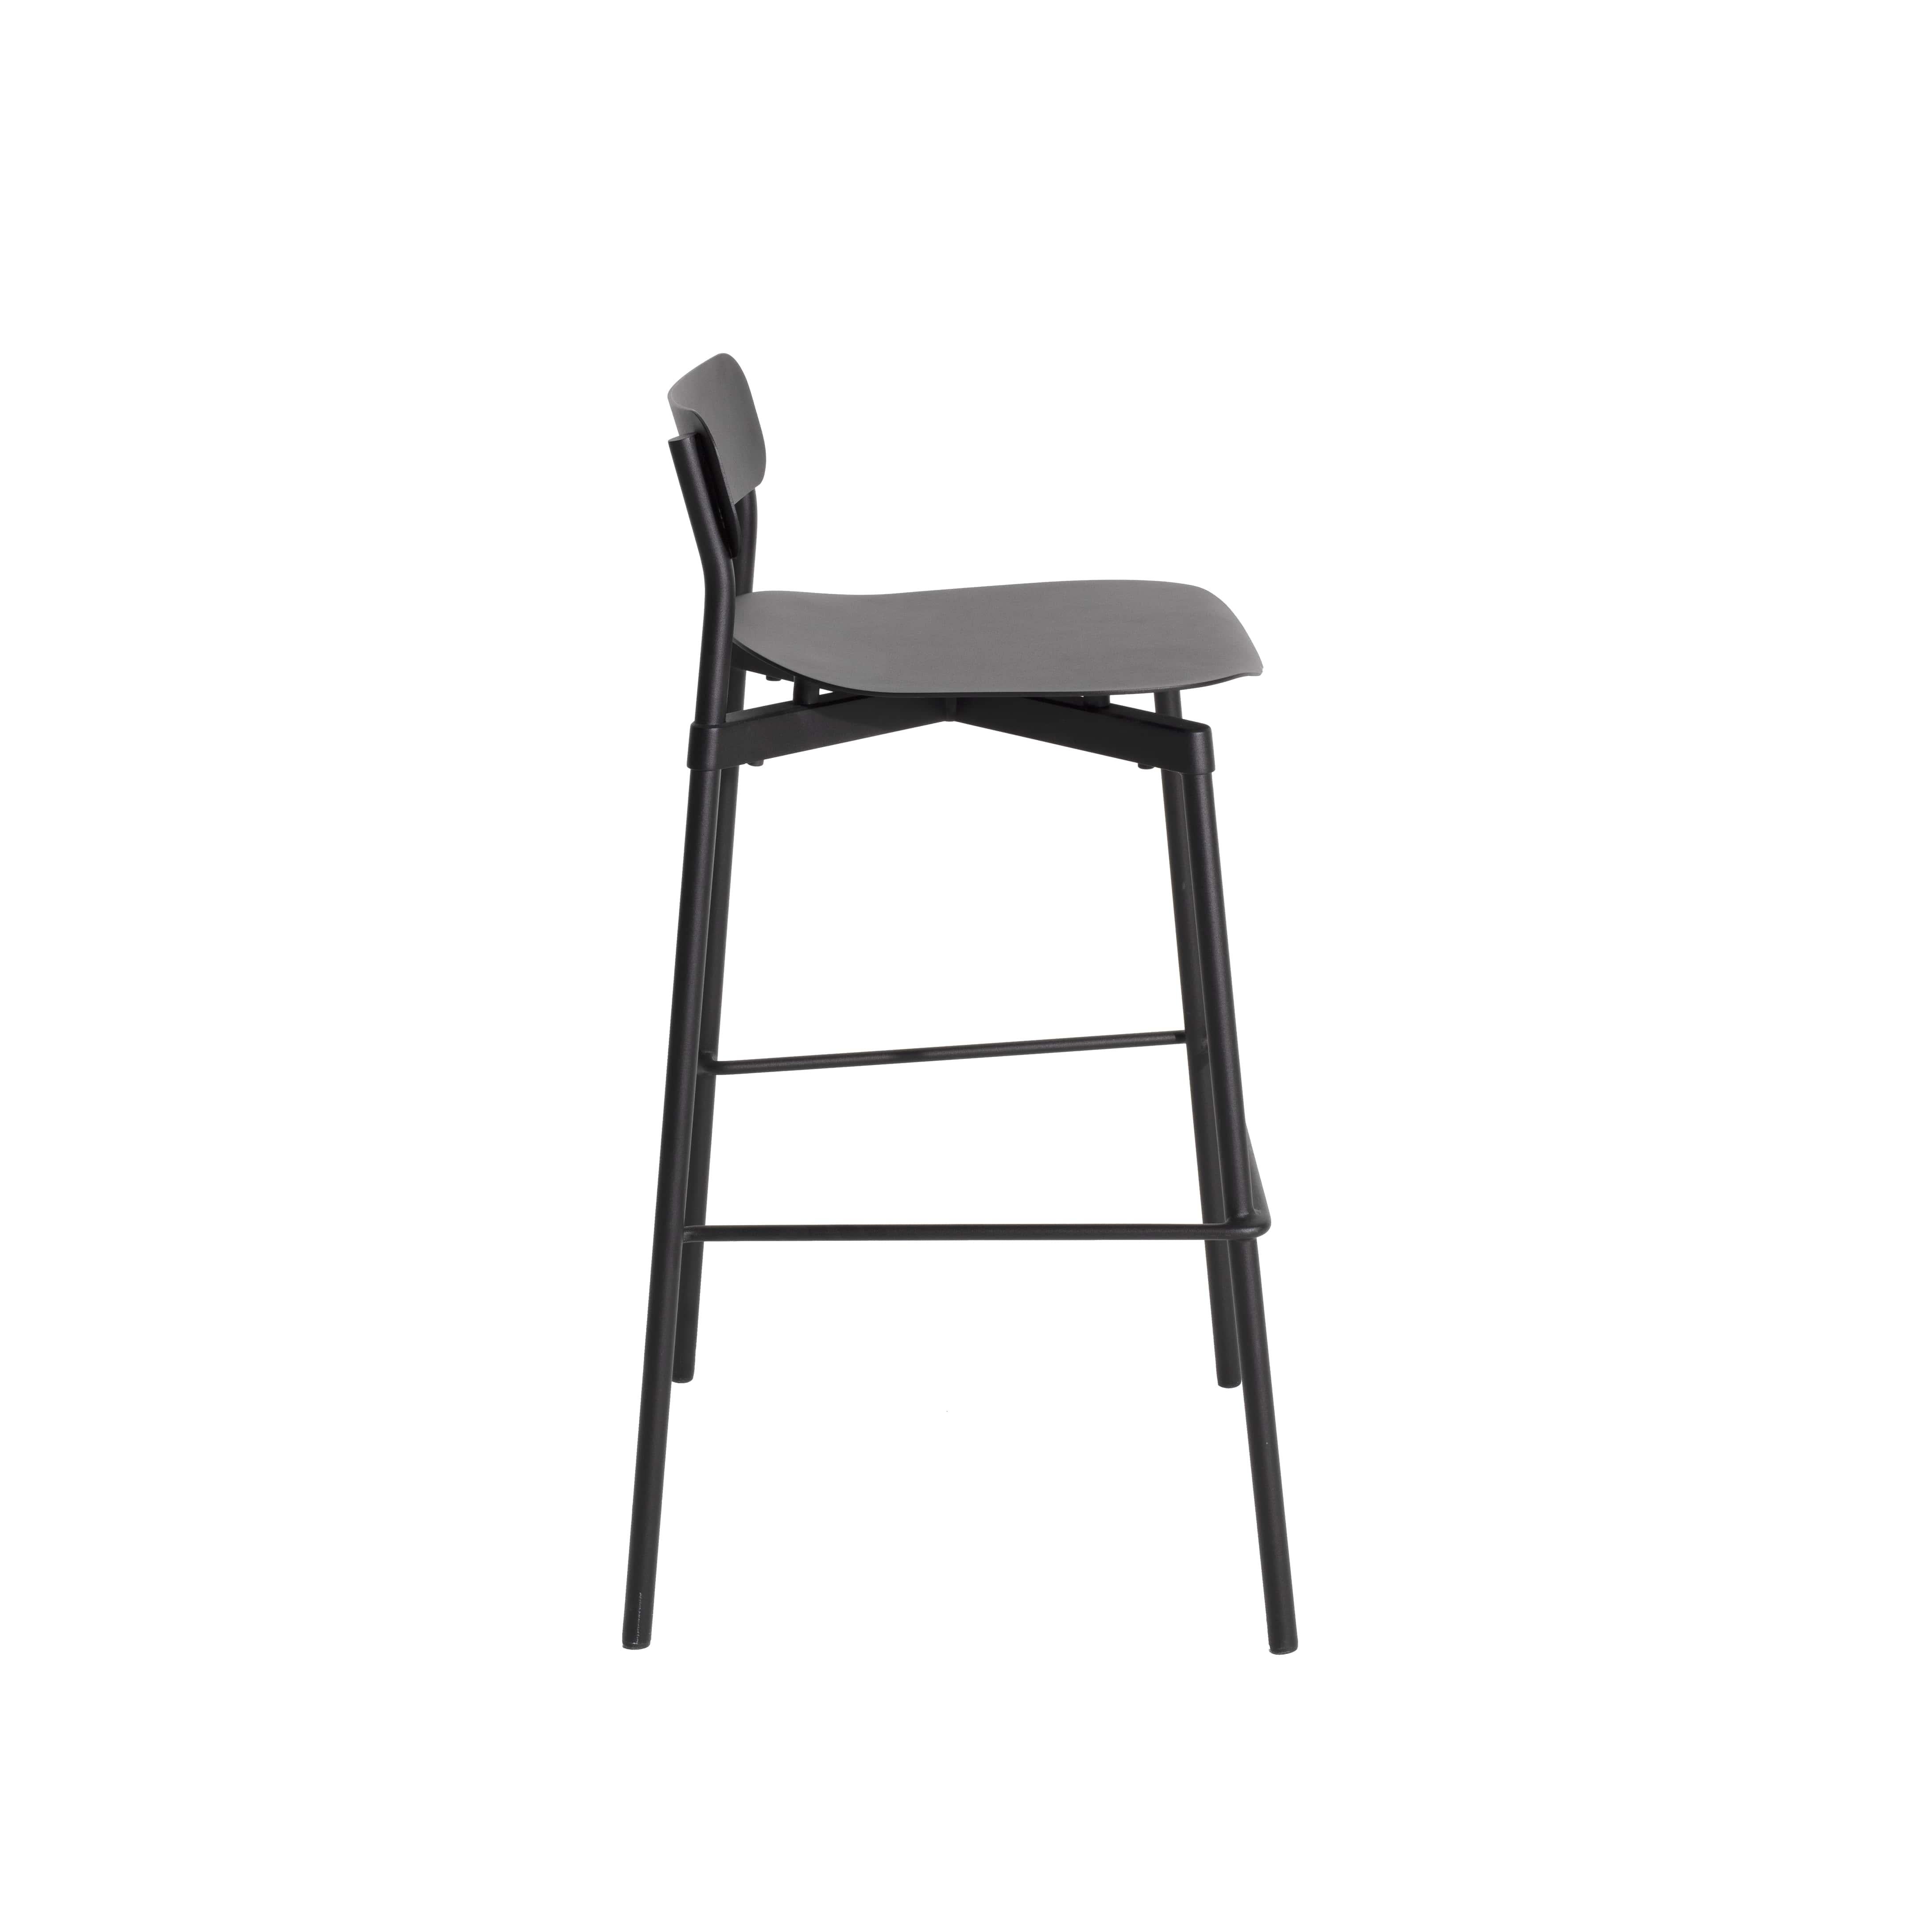 Petite Friture Large Fromme Bar stool in Black Aluminium by Tom Chung, 2020

The Fromme collection stands out by its pure line and compact design. Absorbers placed under the seating gives a soft and very comfortable flexibility to seats. Made from